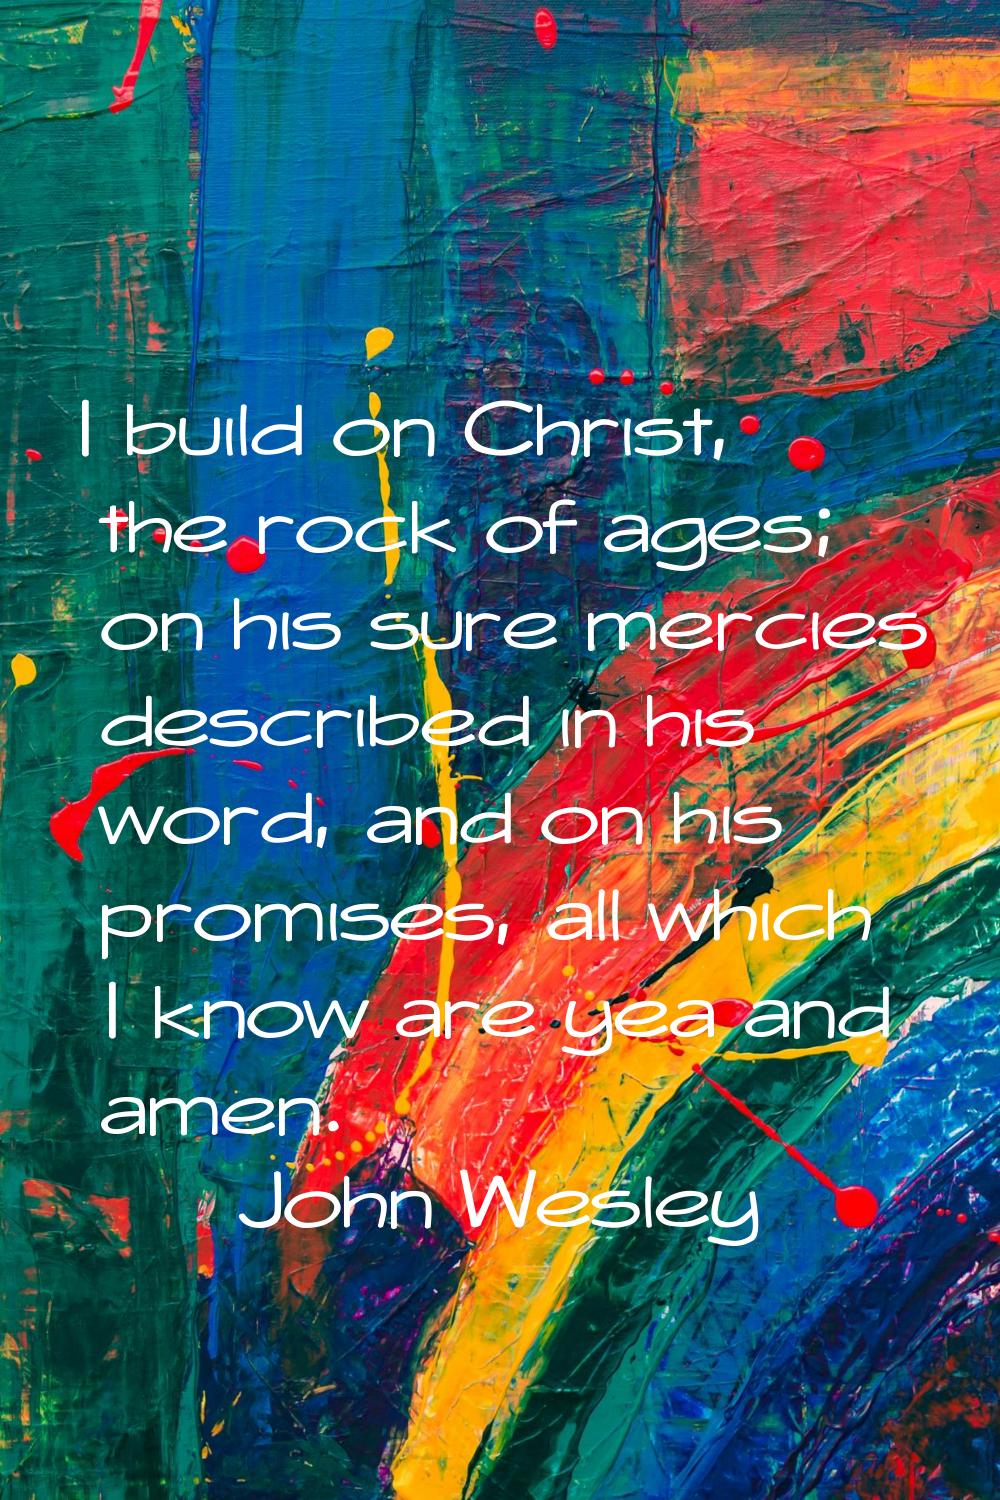 I build on Christ, the rock of ages; on his sure mercies described in his word, and on his promises